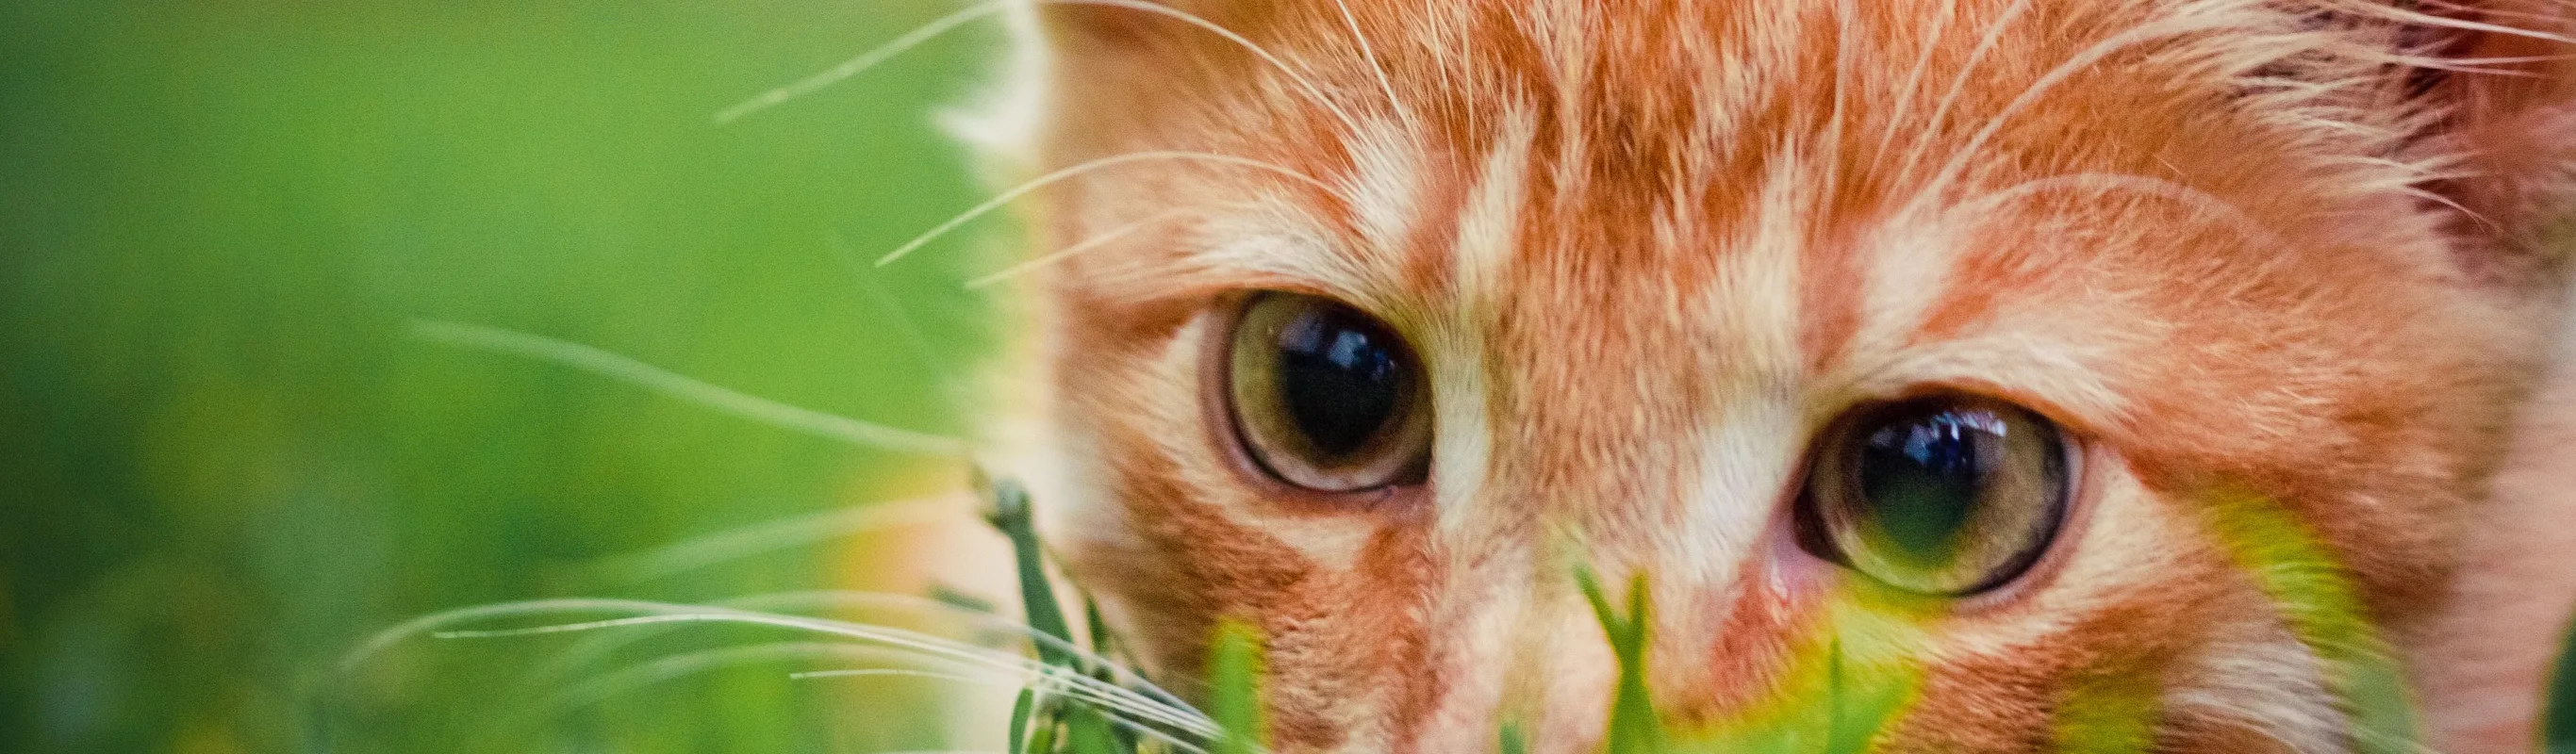 Close up of a cat sitting in grass